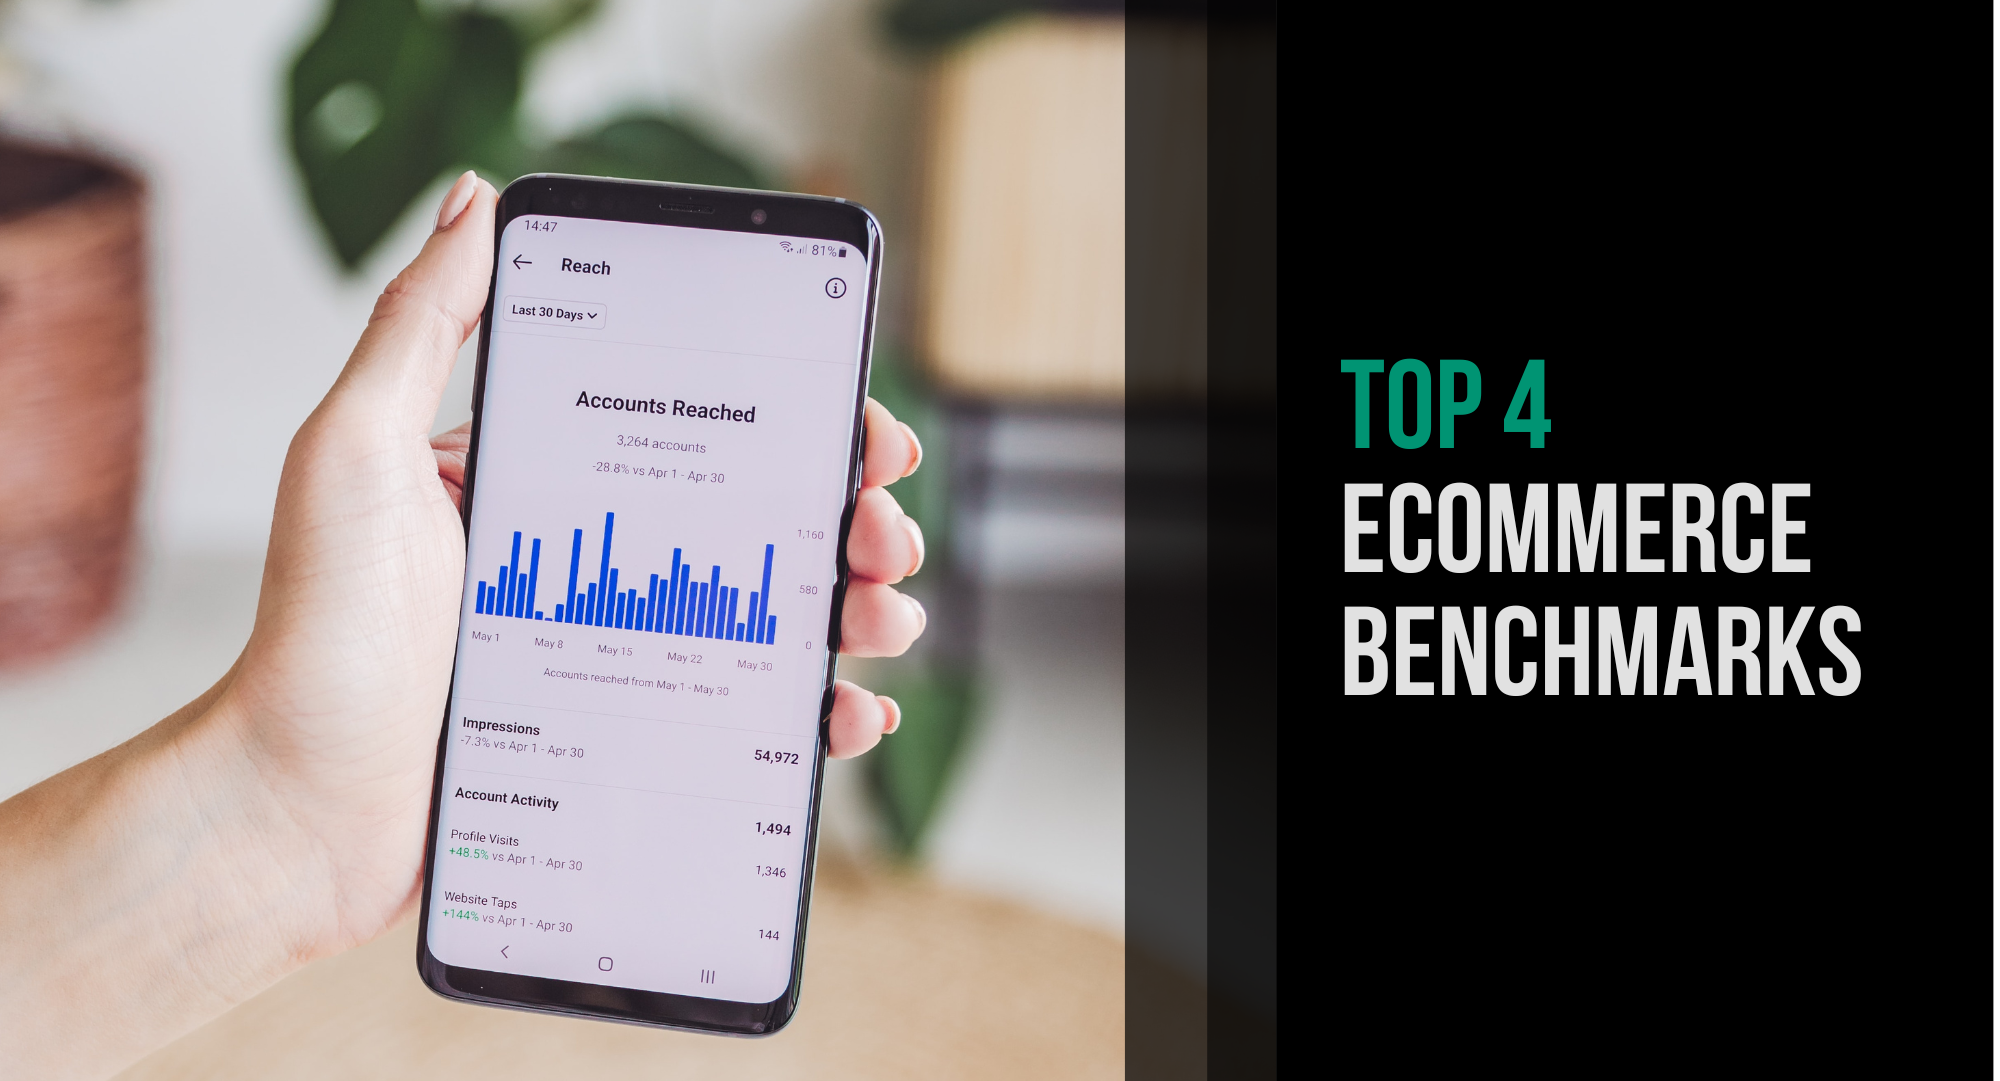 The top 4 ecommerce benchmarks